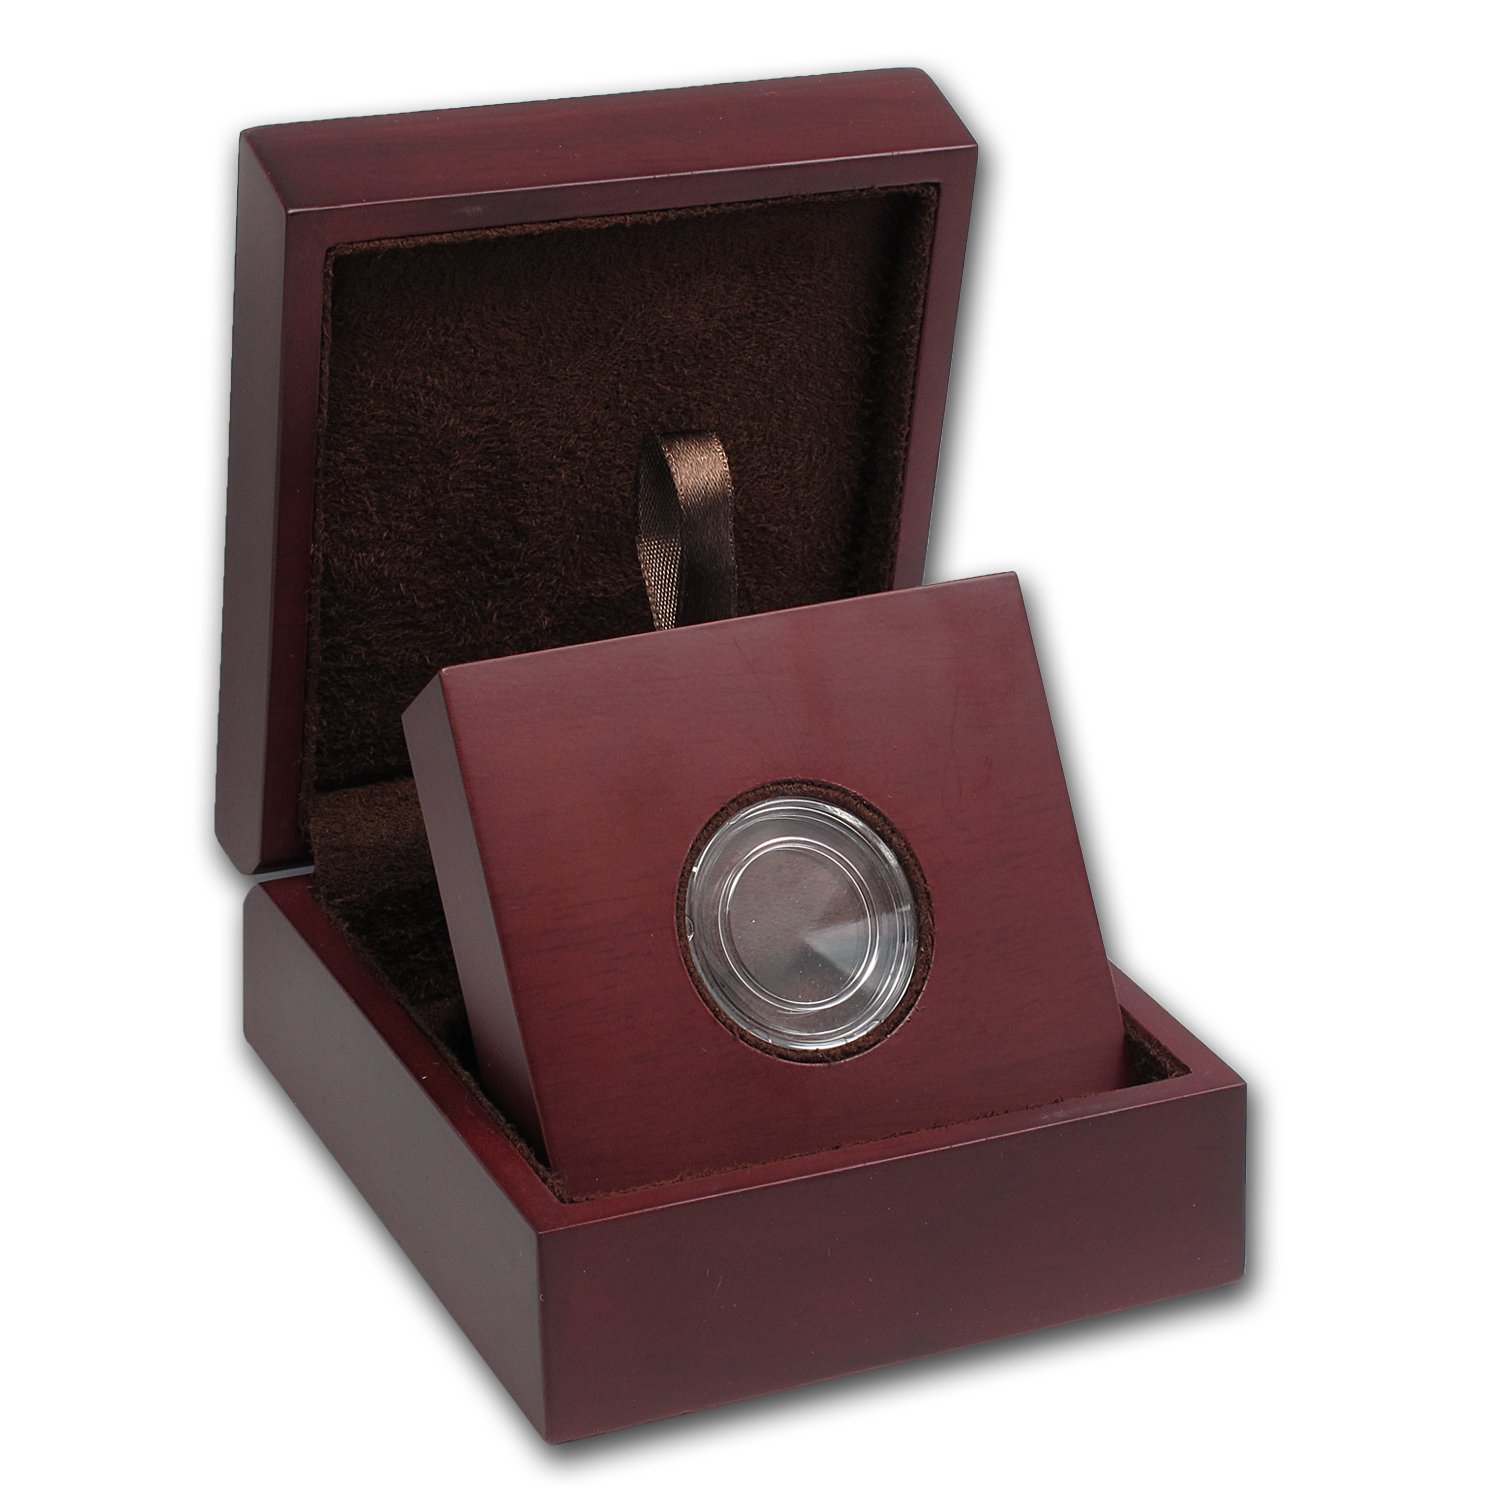 Buy APMEX Wood Gift Box - Includes 19 mm Direct Fit Air-Tite Holder